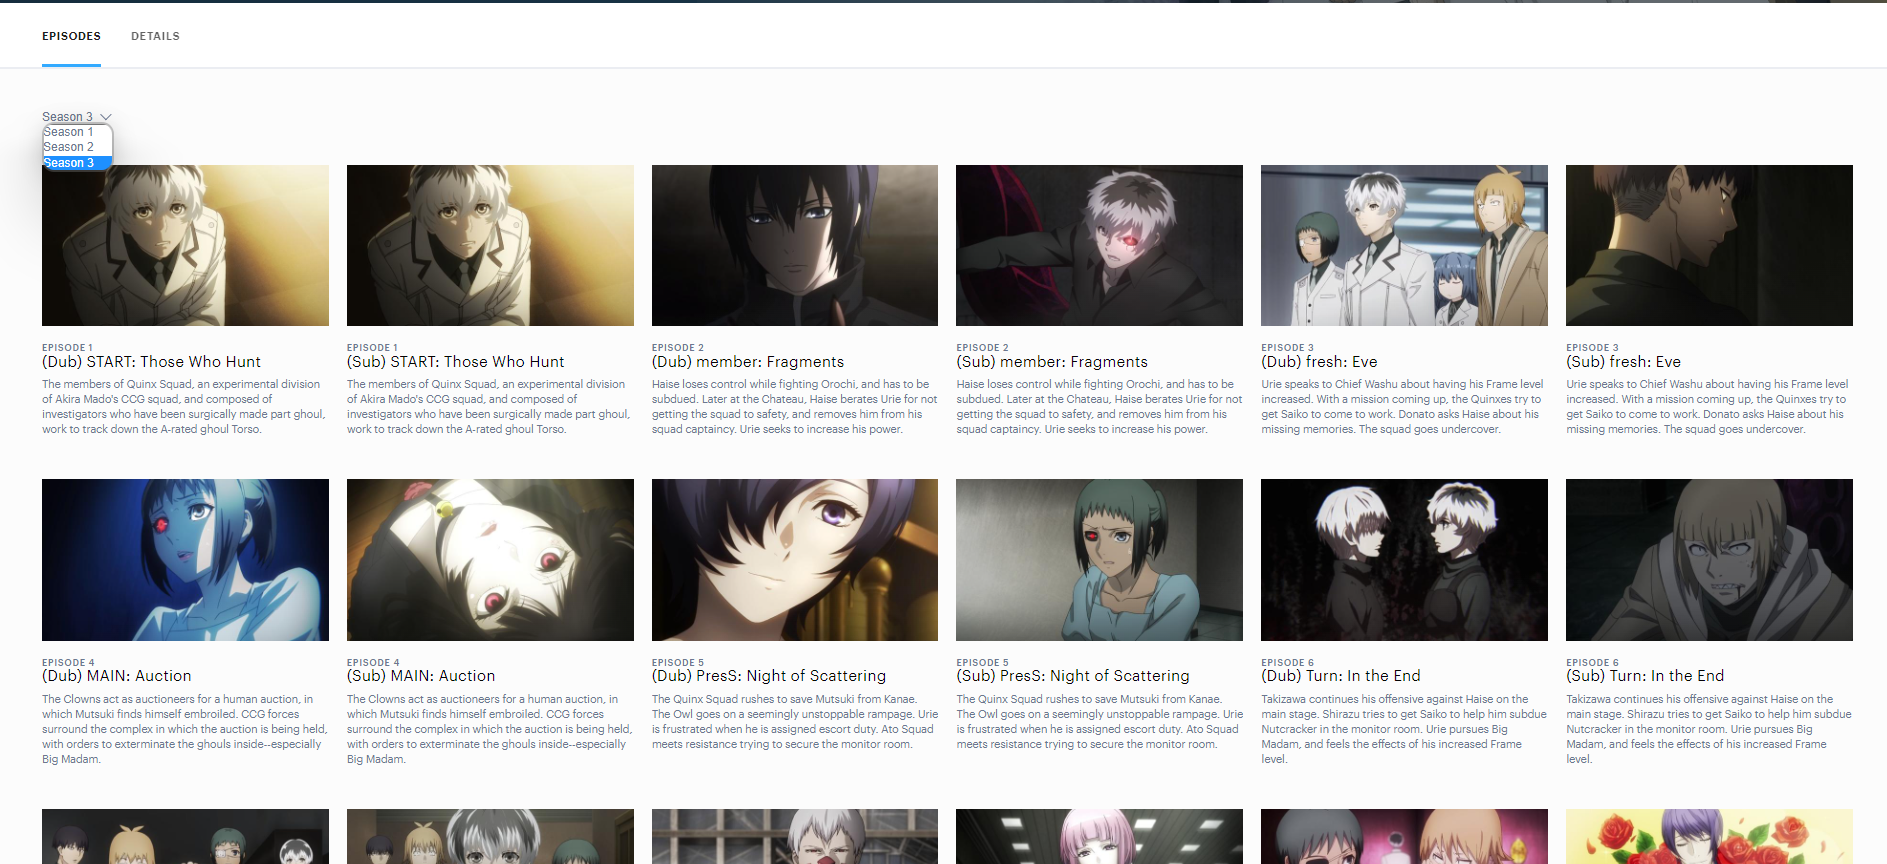 How to watch Tokyo Ghoul on Hulu Free